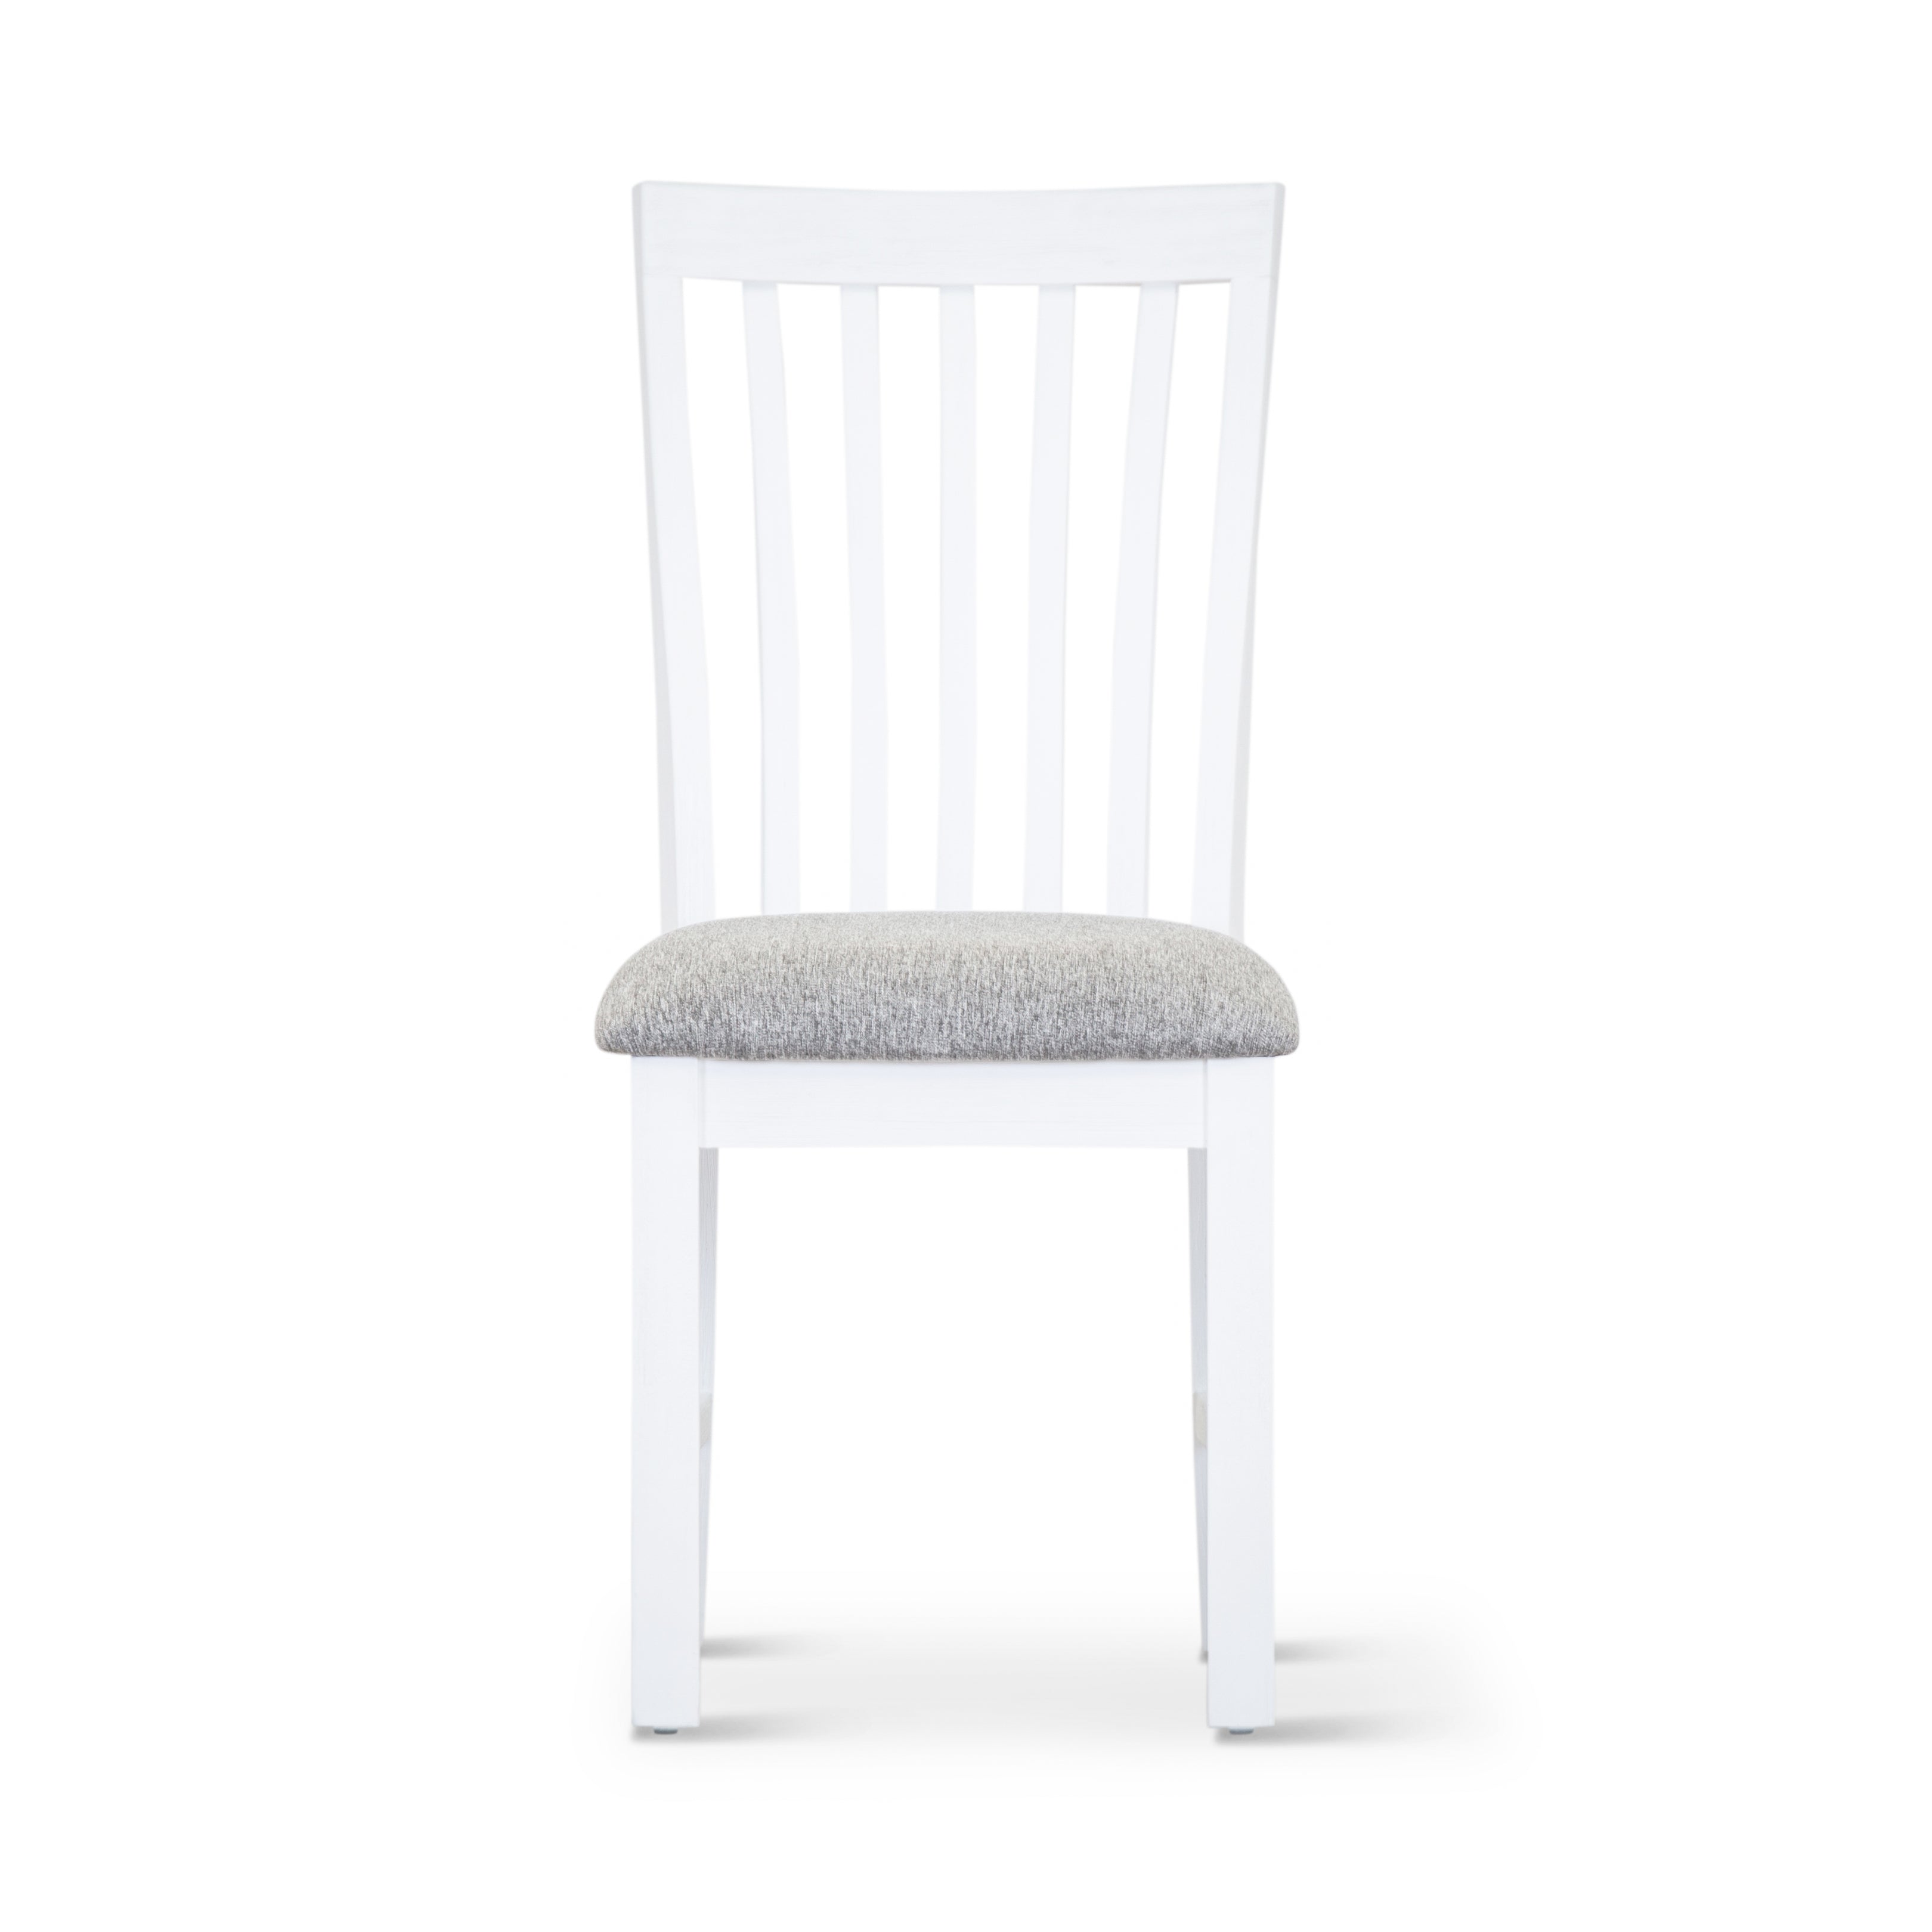 Dining Chair Set Of 6 Solid Acacia Timber Wood Coastal Furniture - White